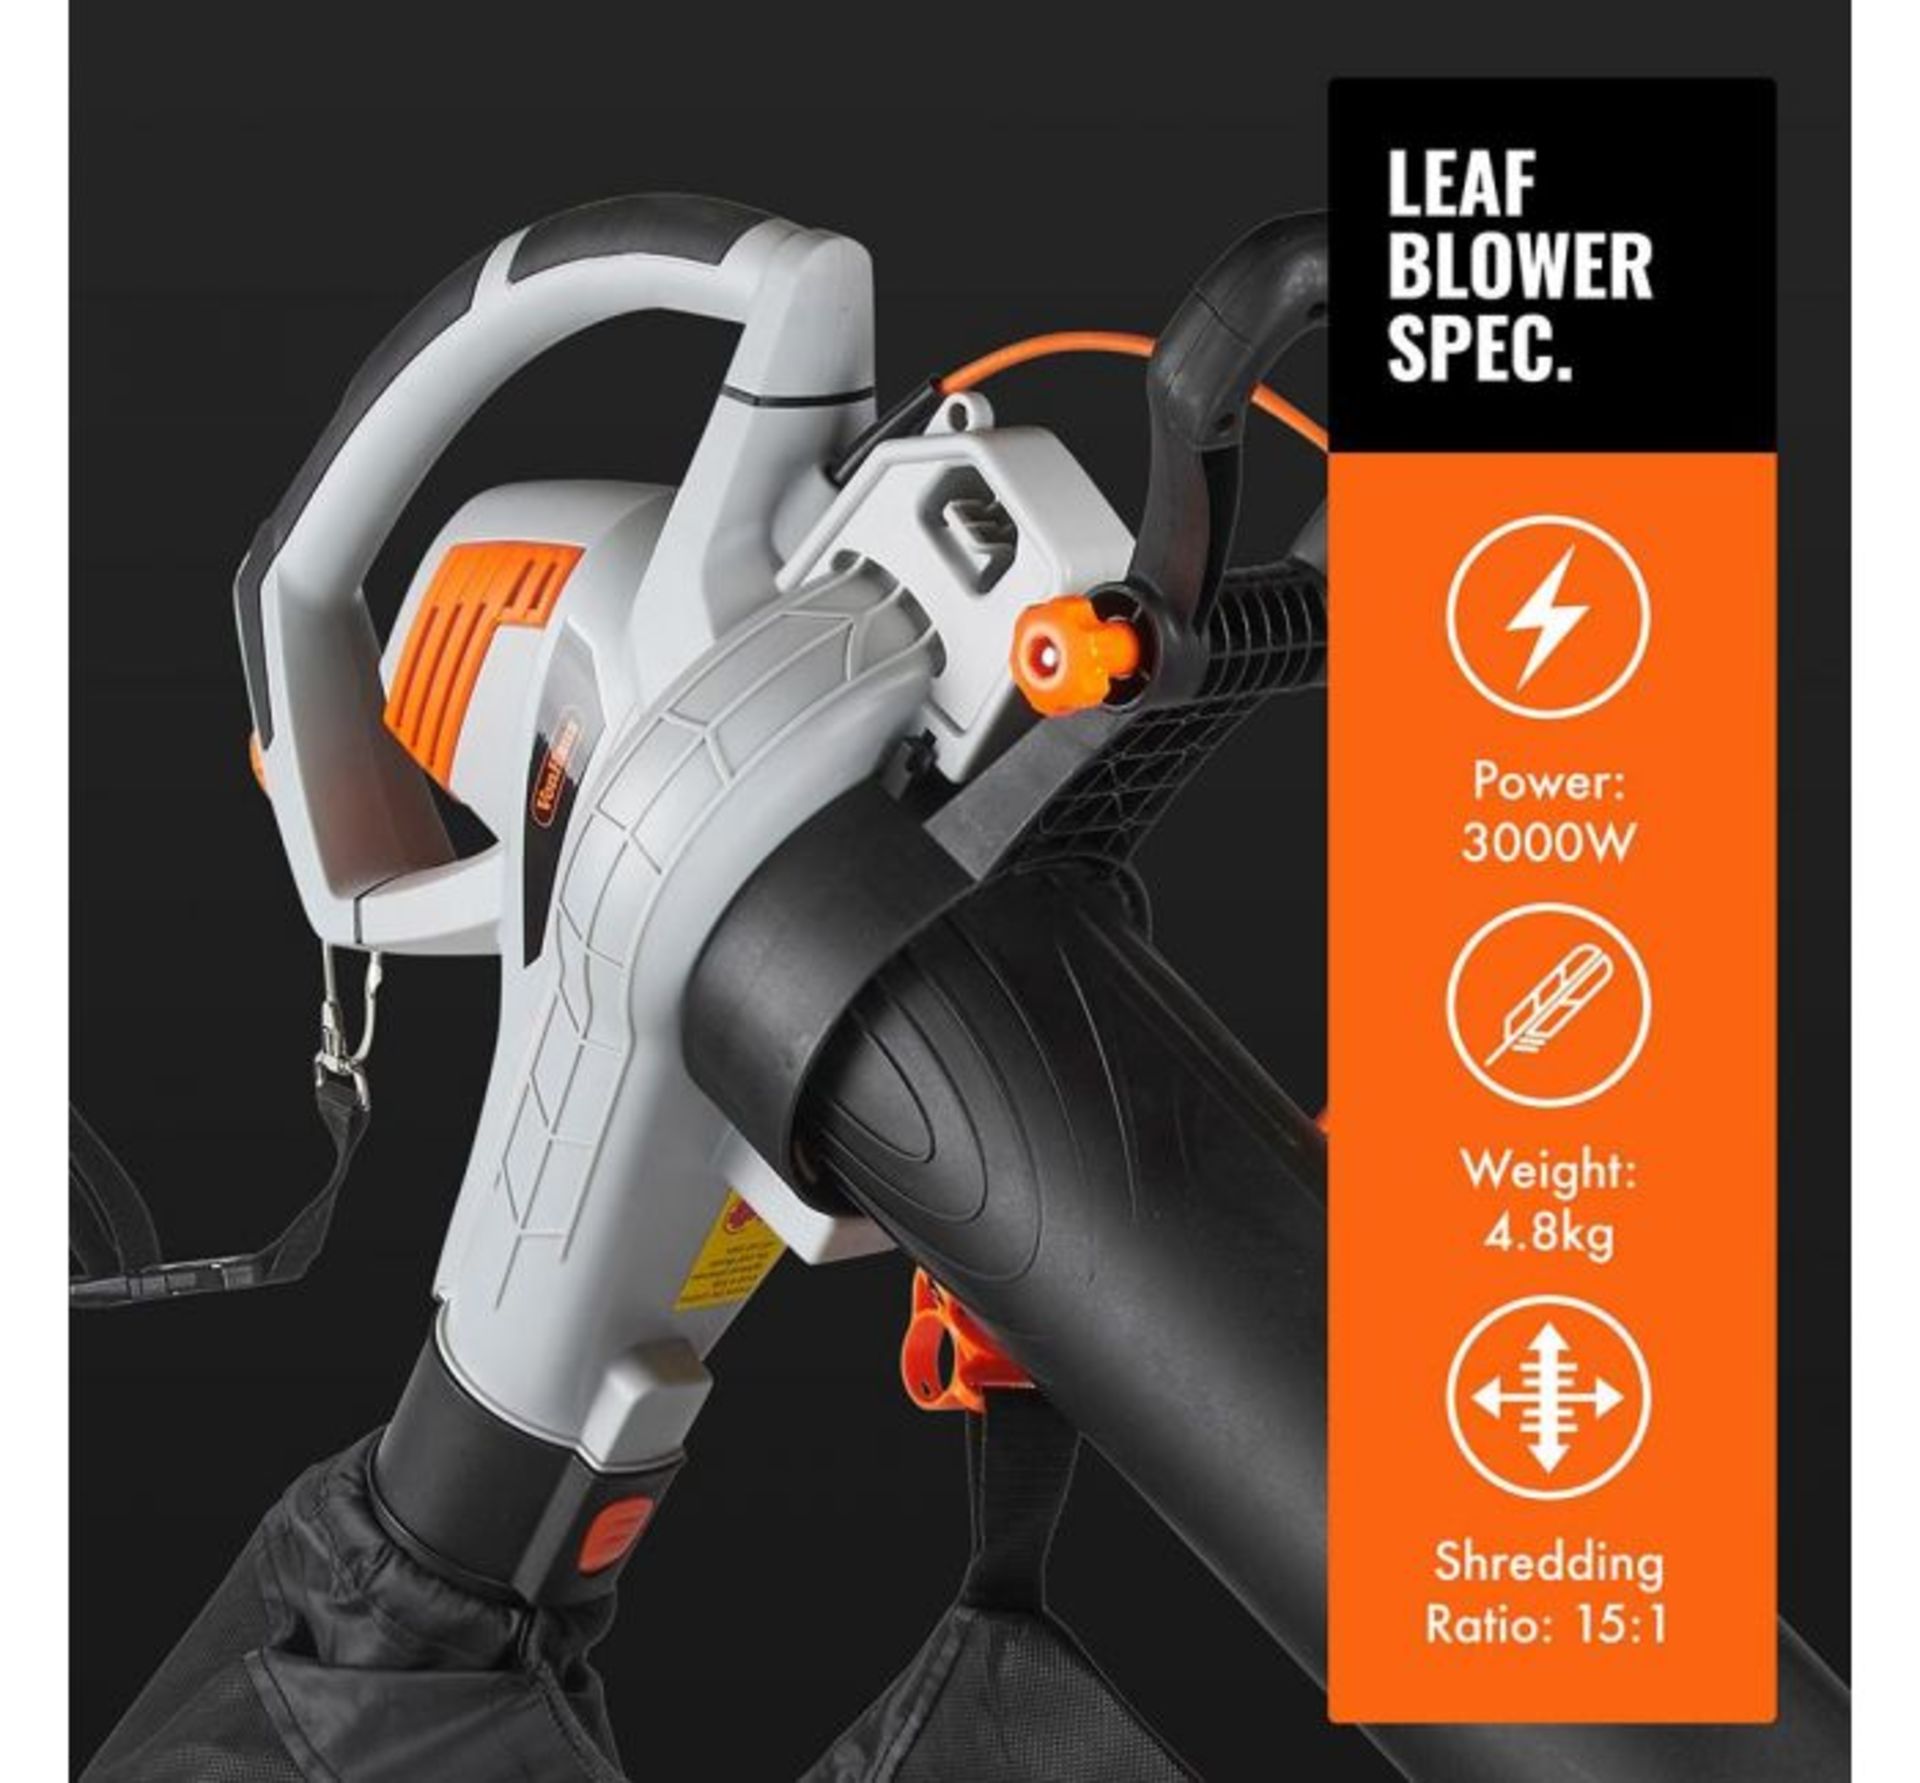 (GE25) 3000W 3-in-1 Leaf Blower Powerful 3000W motor blows, vacuums and mulches leaves into ma... - Image 4 of 5